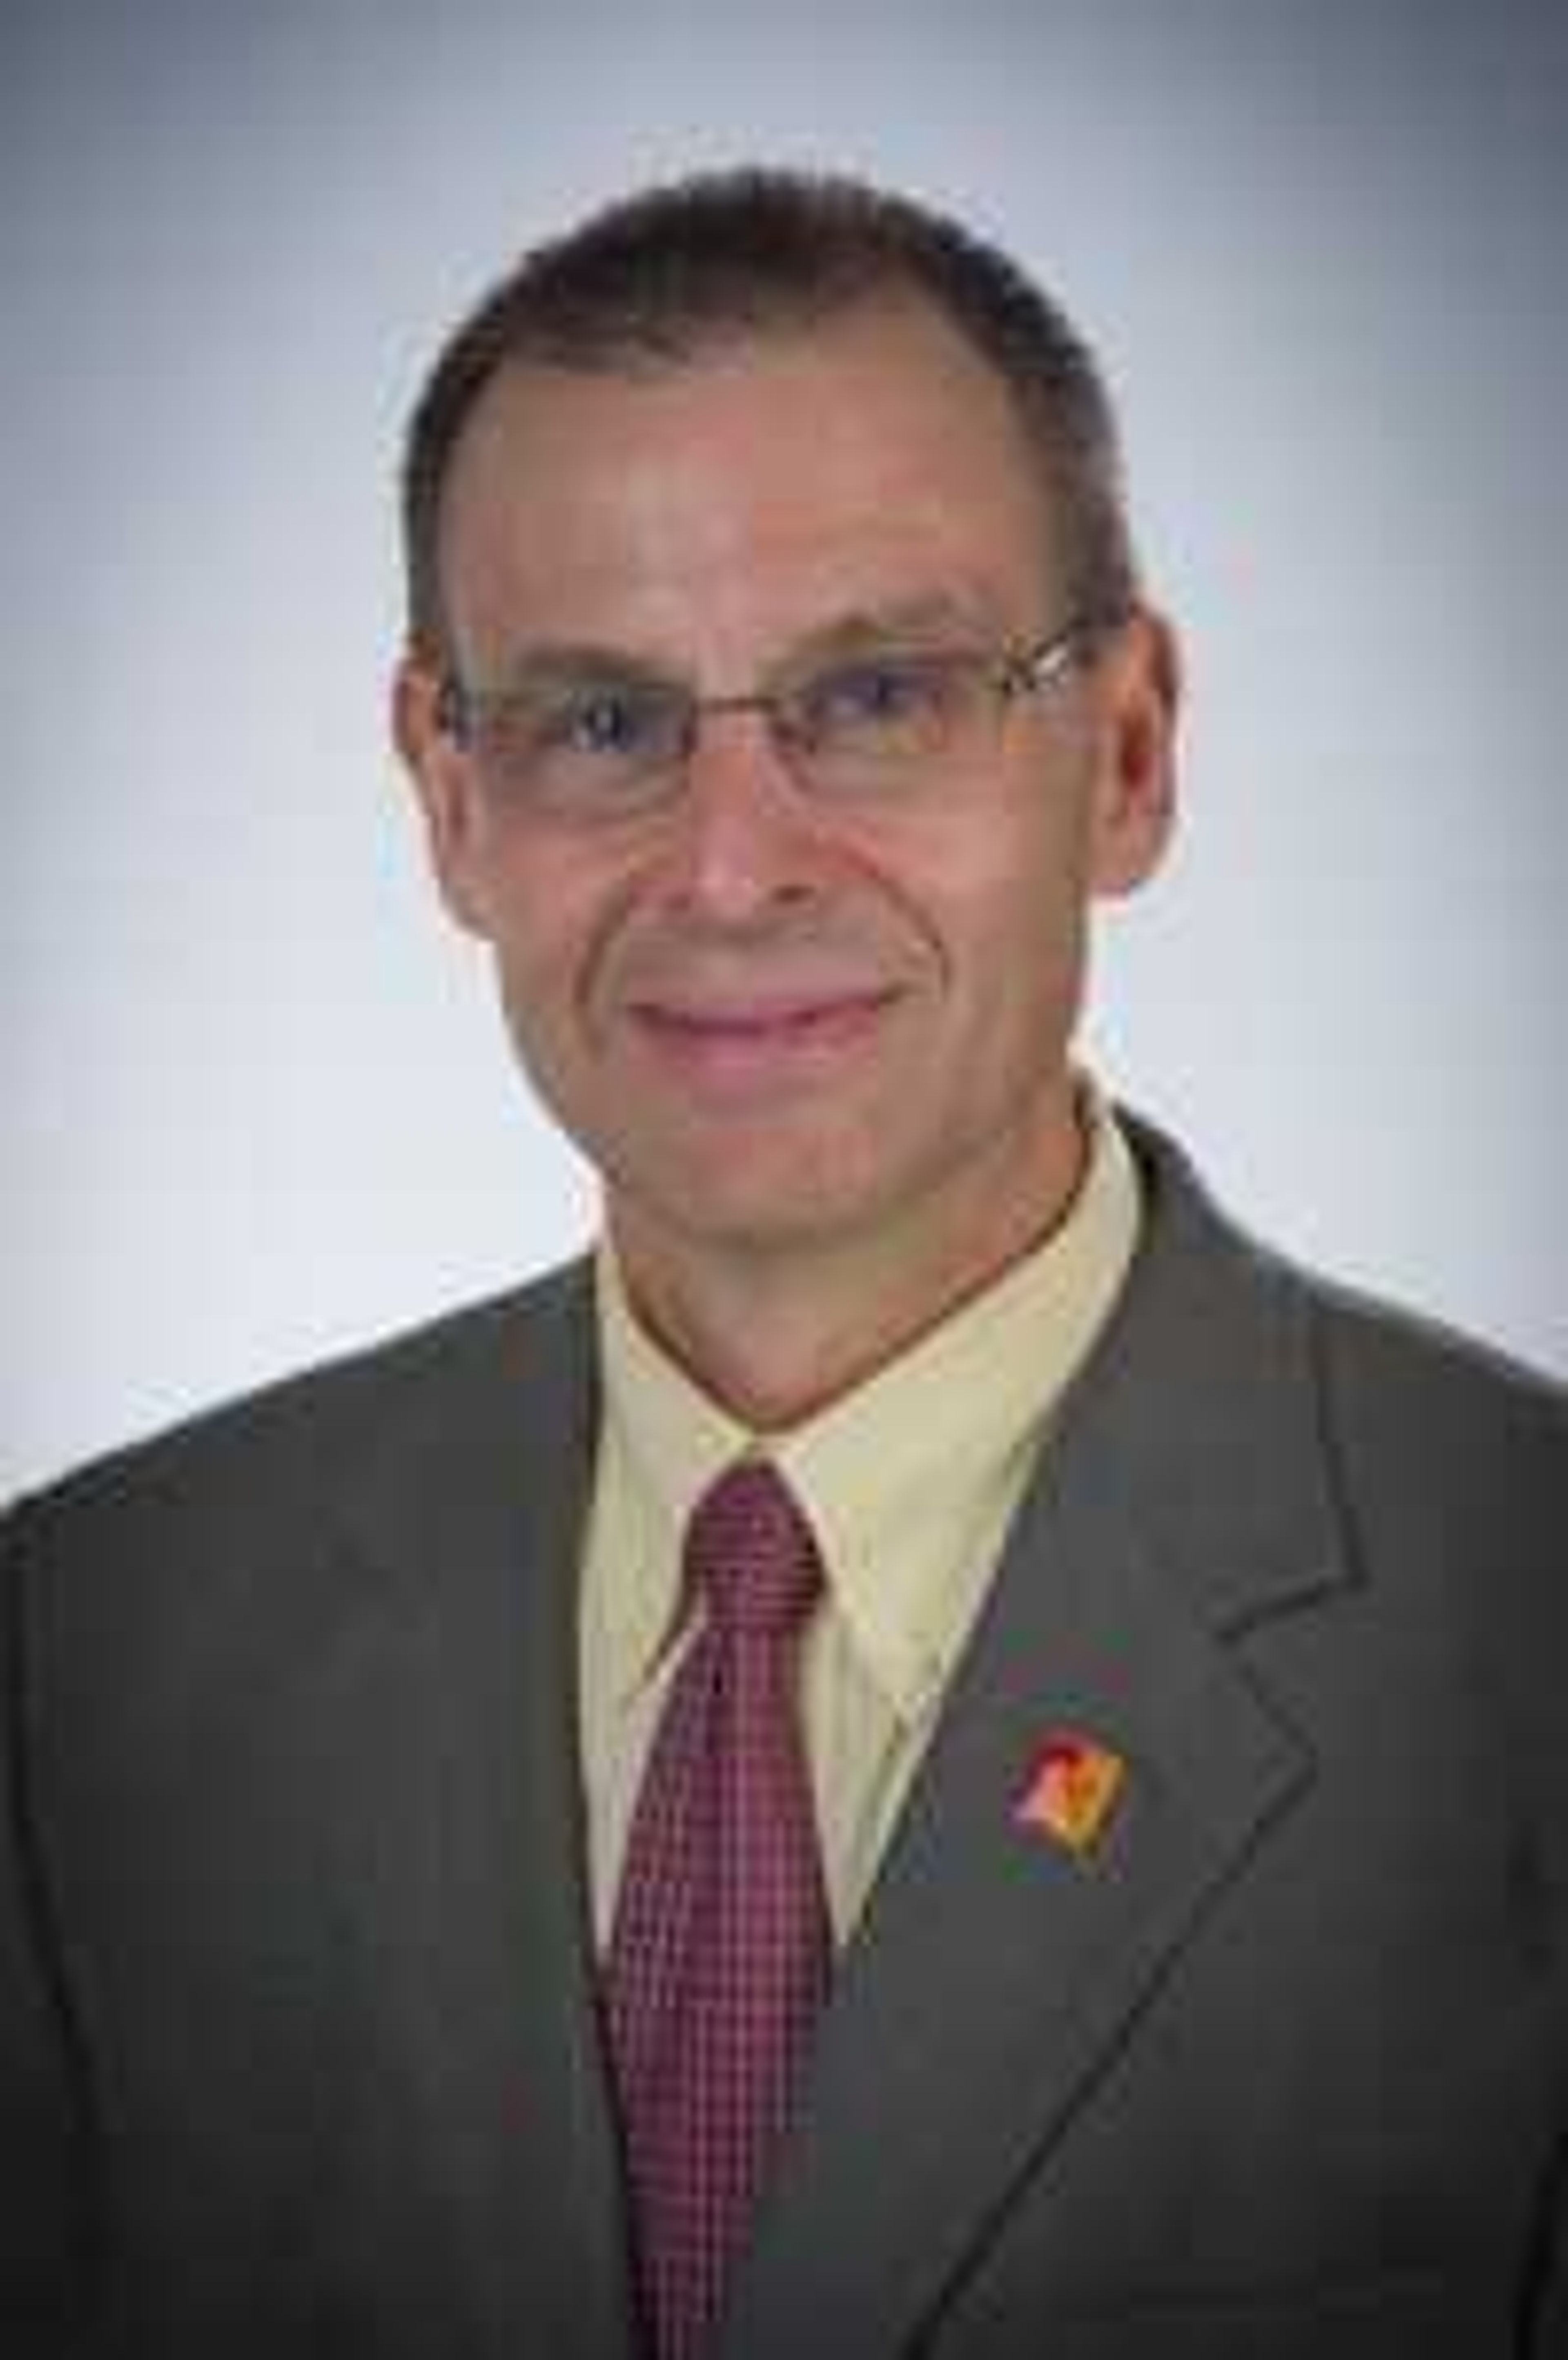 Dr. Karl R. Kunkel, dean of the College of Arts and Sciences at Pittsburg State University, will be Southeast Missouri State University’s provost in February.